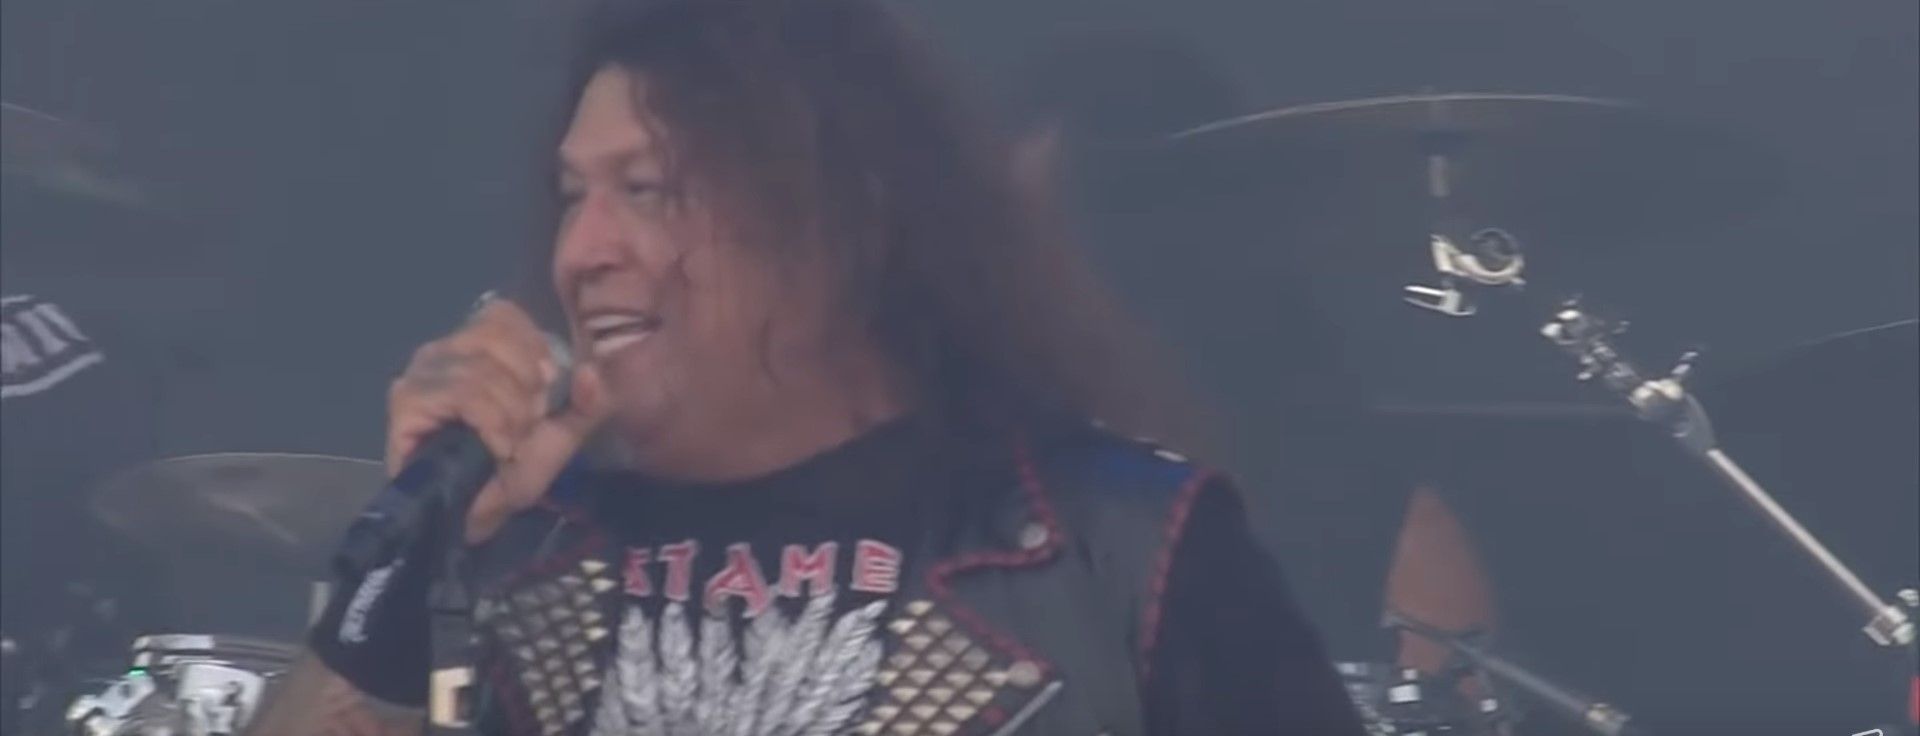 Testament - Over The Wall (Live At Summer Breeze 2019)